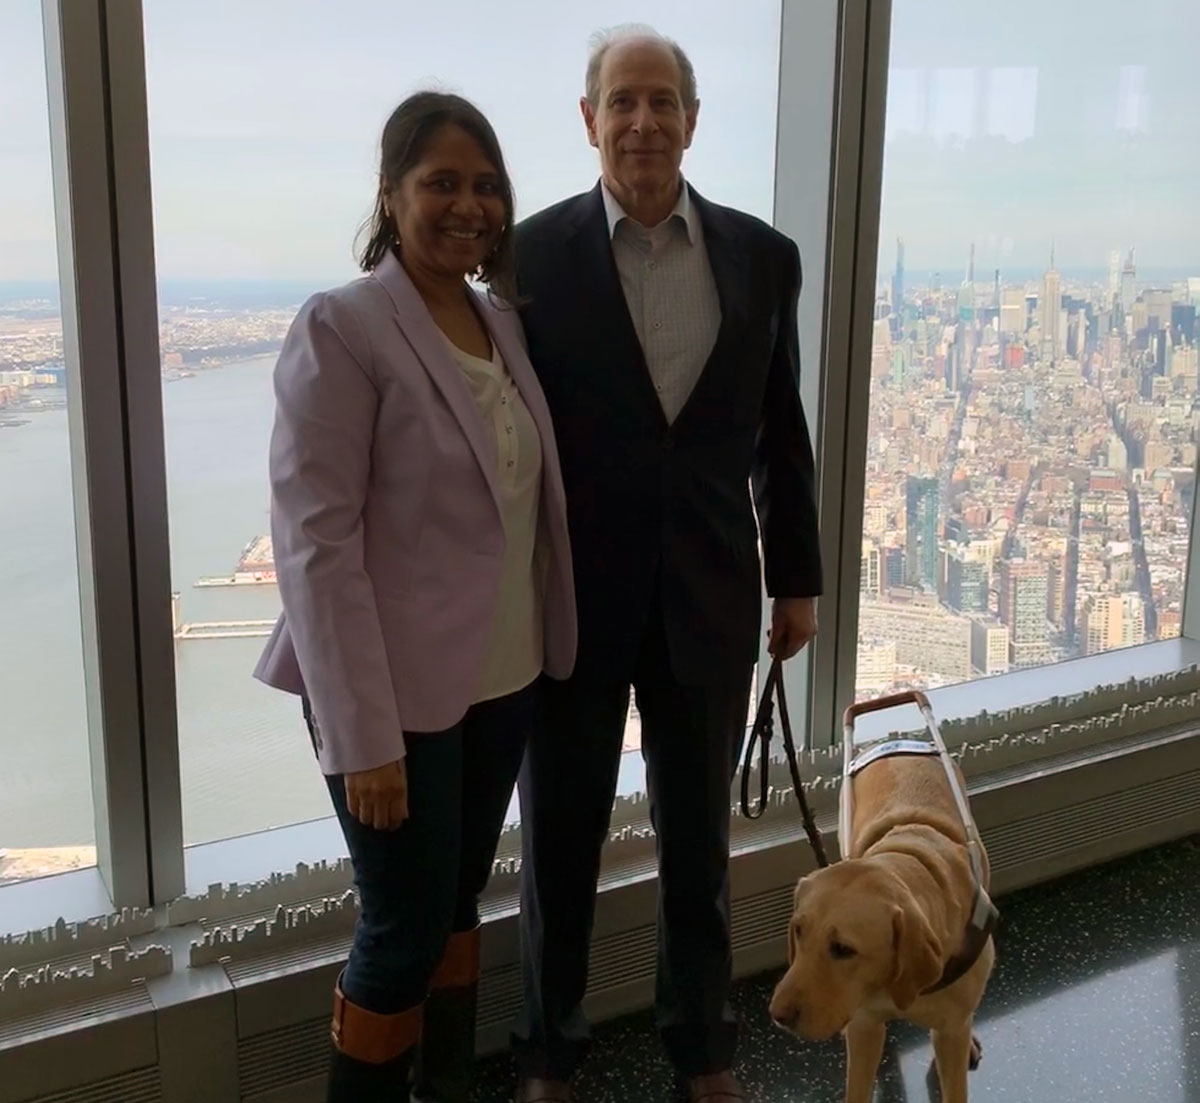 Lakshmee Lachhman-Persad (left), Peter Slatin (right) and Peter's guide dog Inga at the One World Observatory, Manhattan view in the background